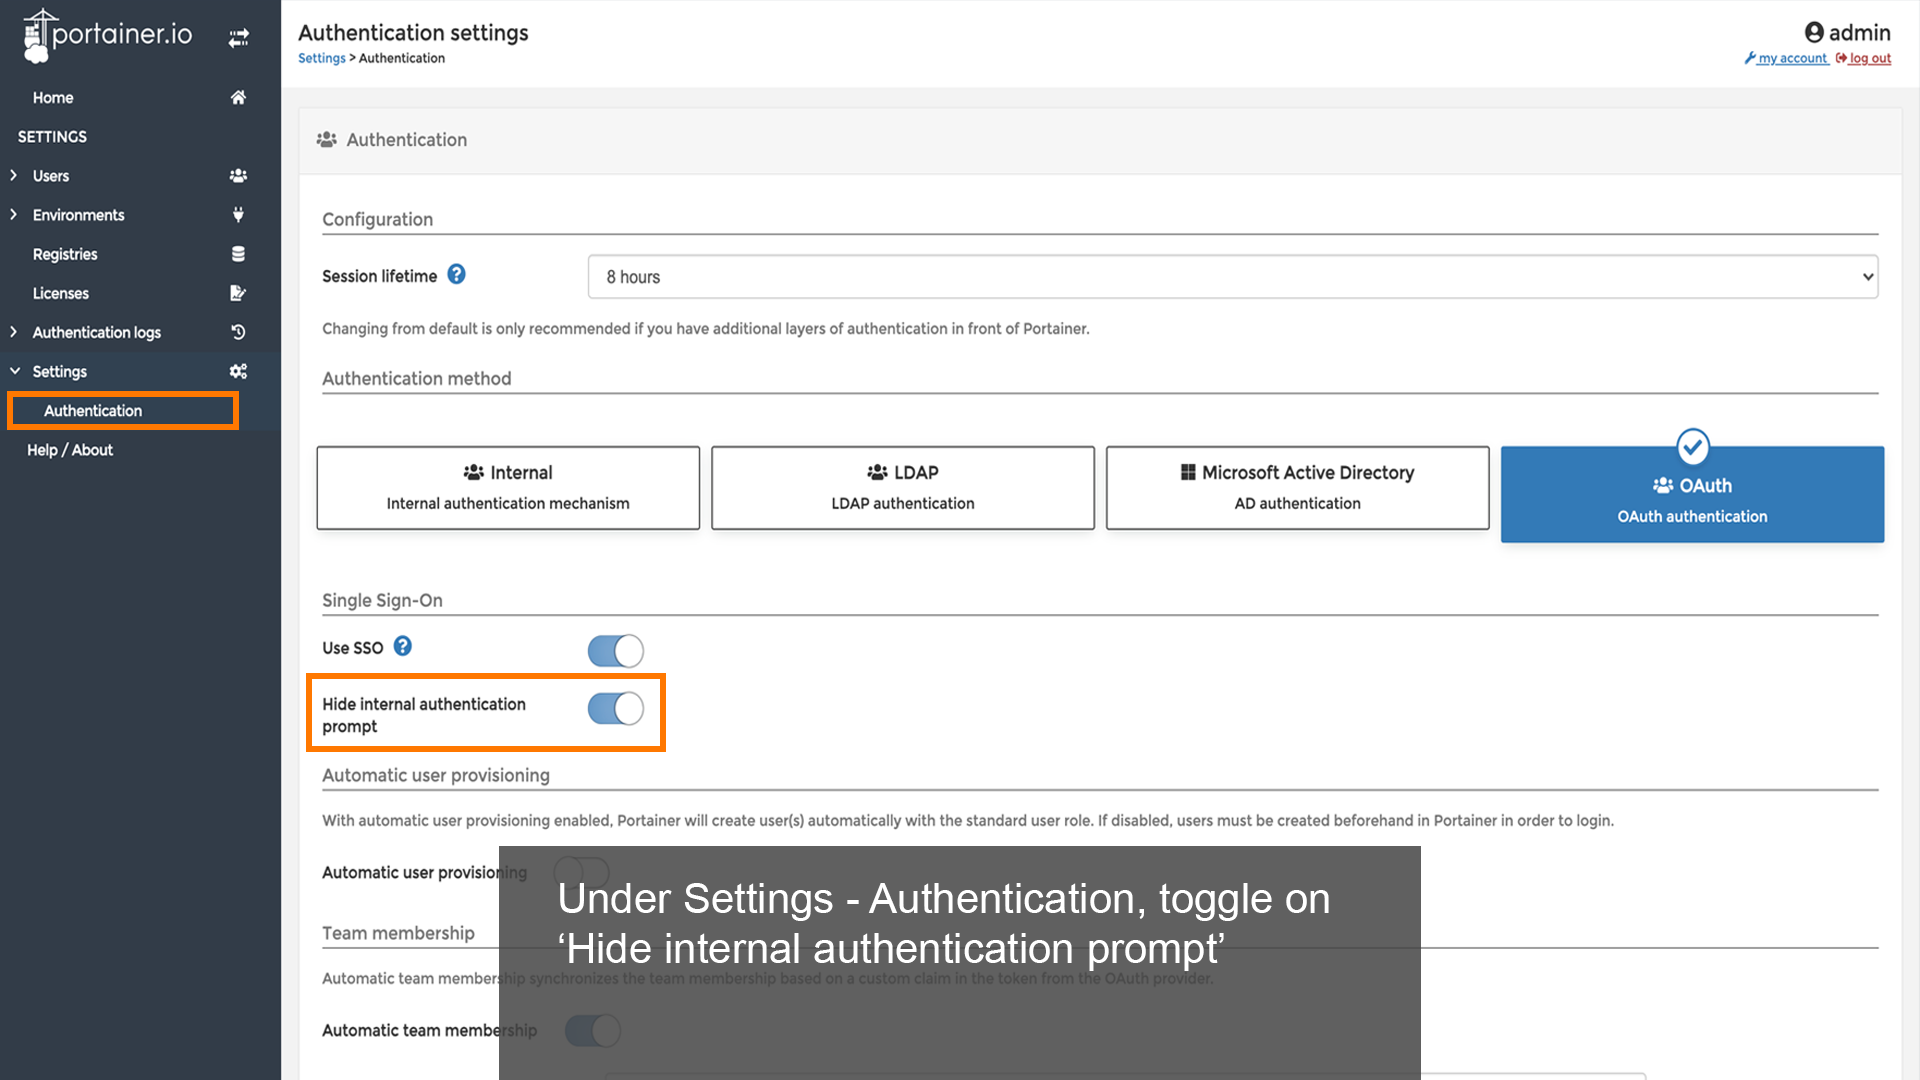 Toggle on 'Hide internal authentication prompt'